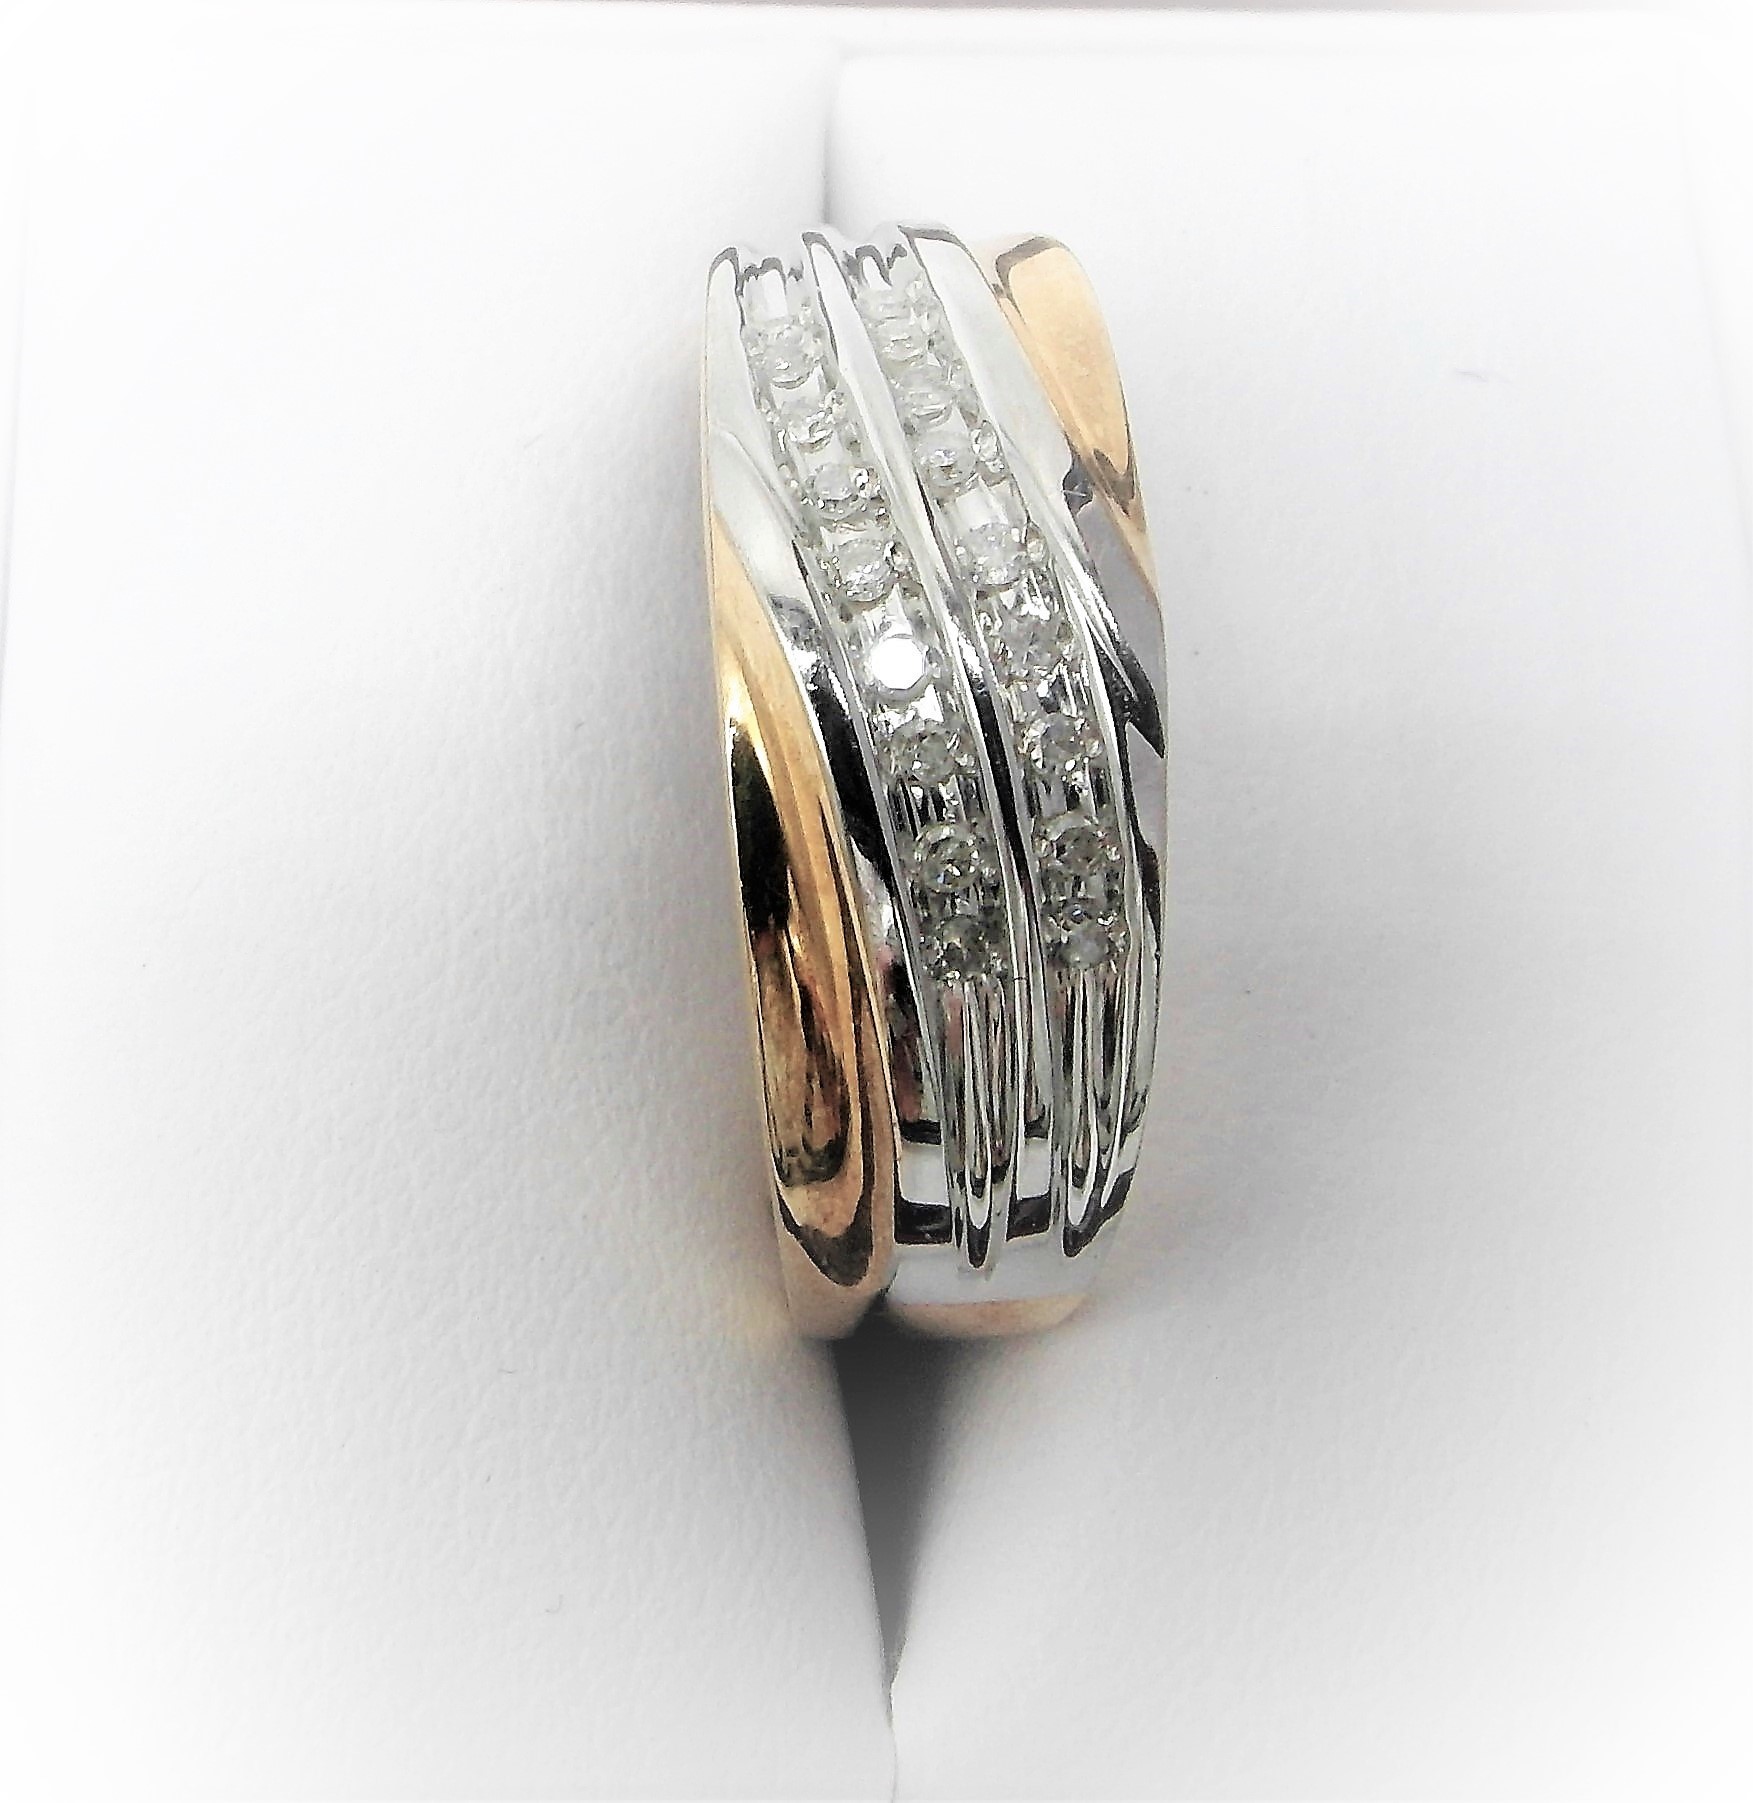 Gents 2 Row Diamond Crossover Ring - Image 4 of 5